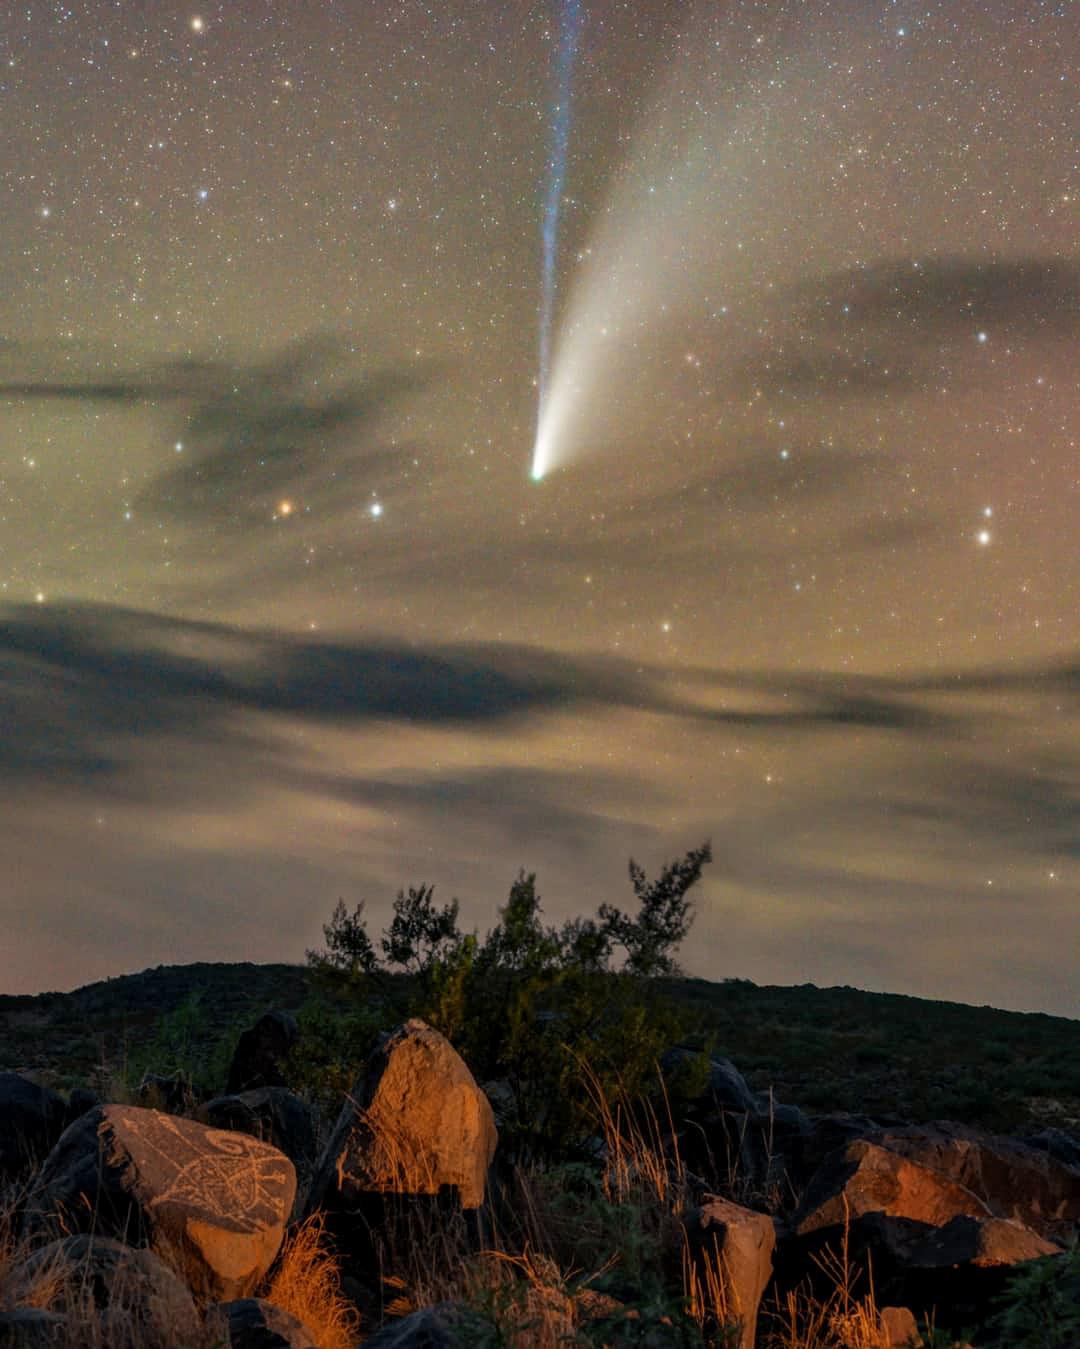 Comet NEOWISE over Three Rivers Petroglyphs, NM